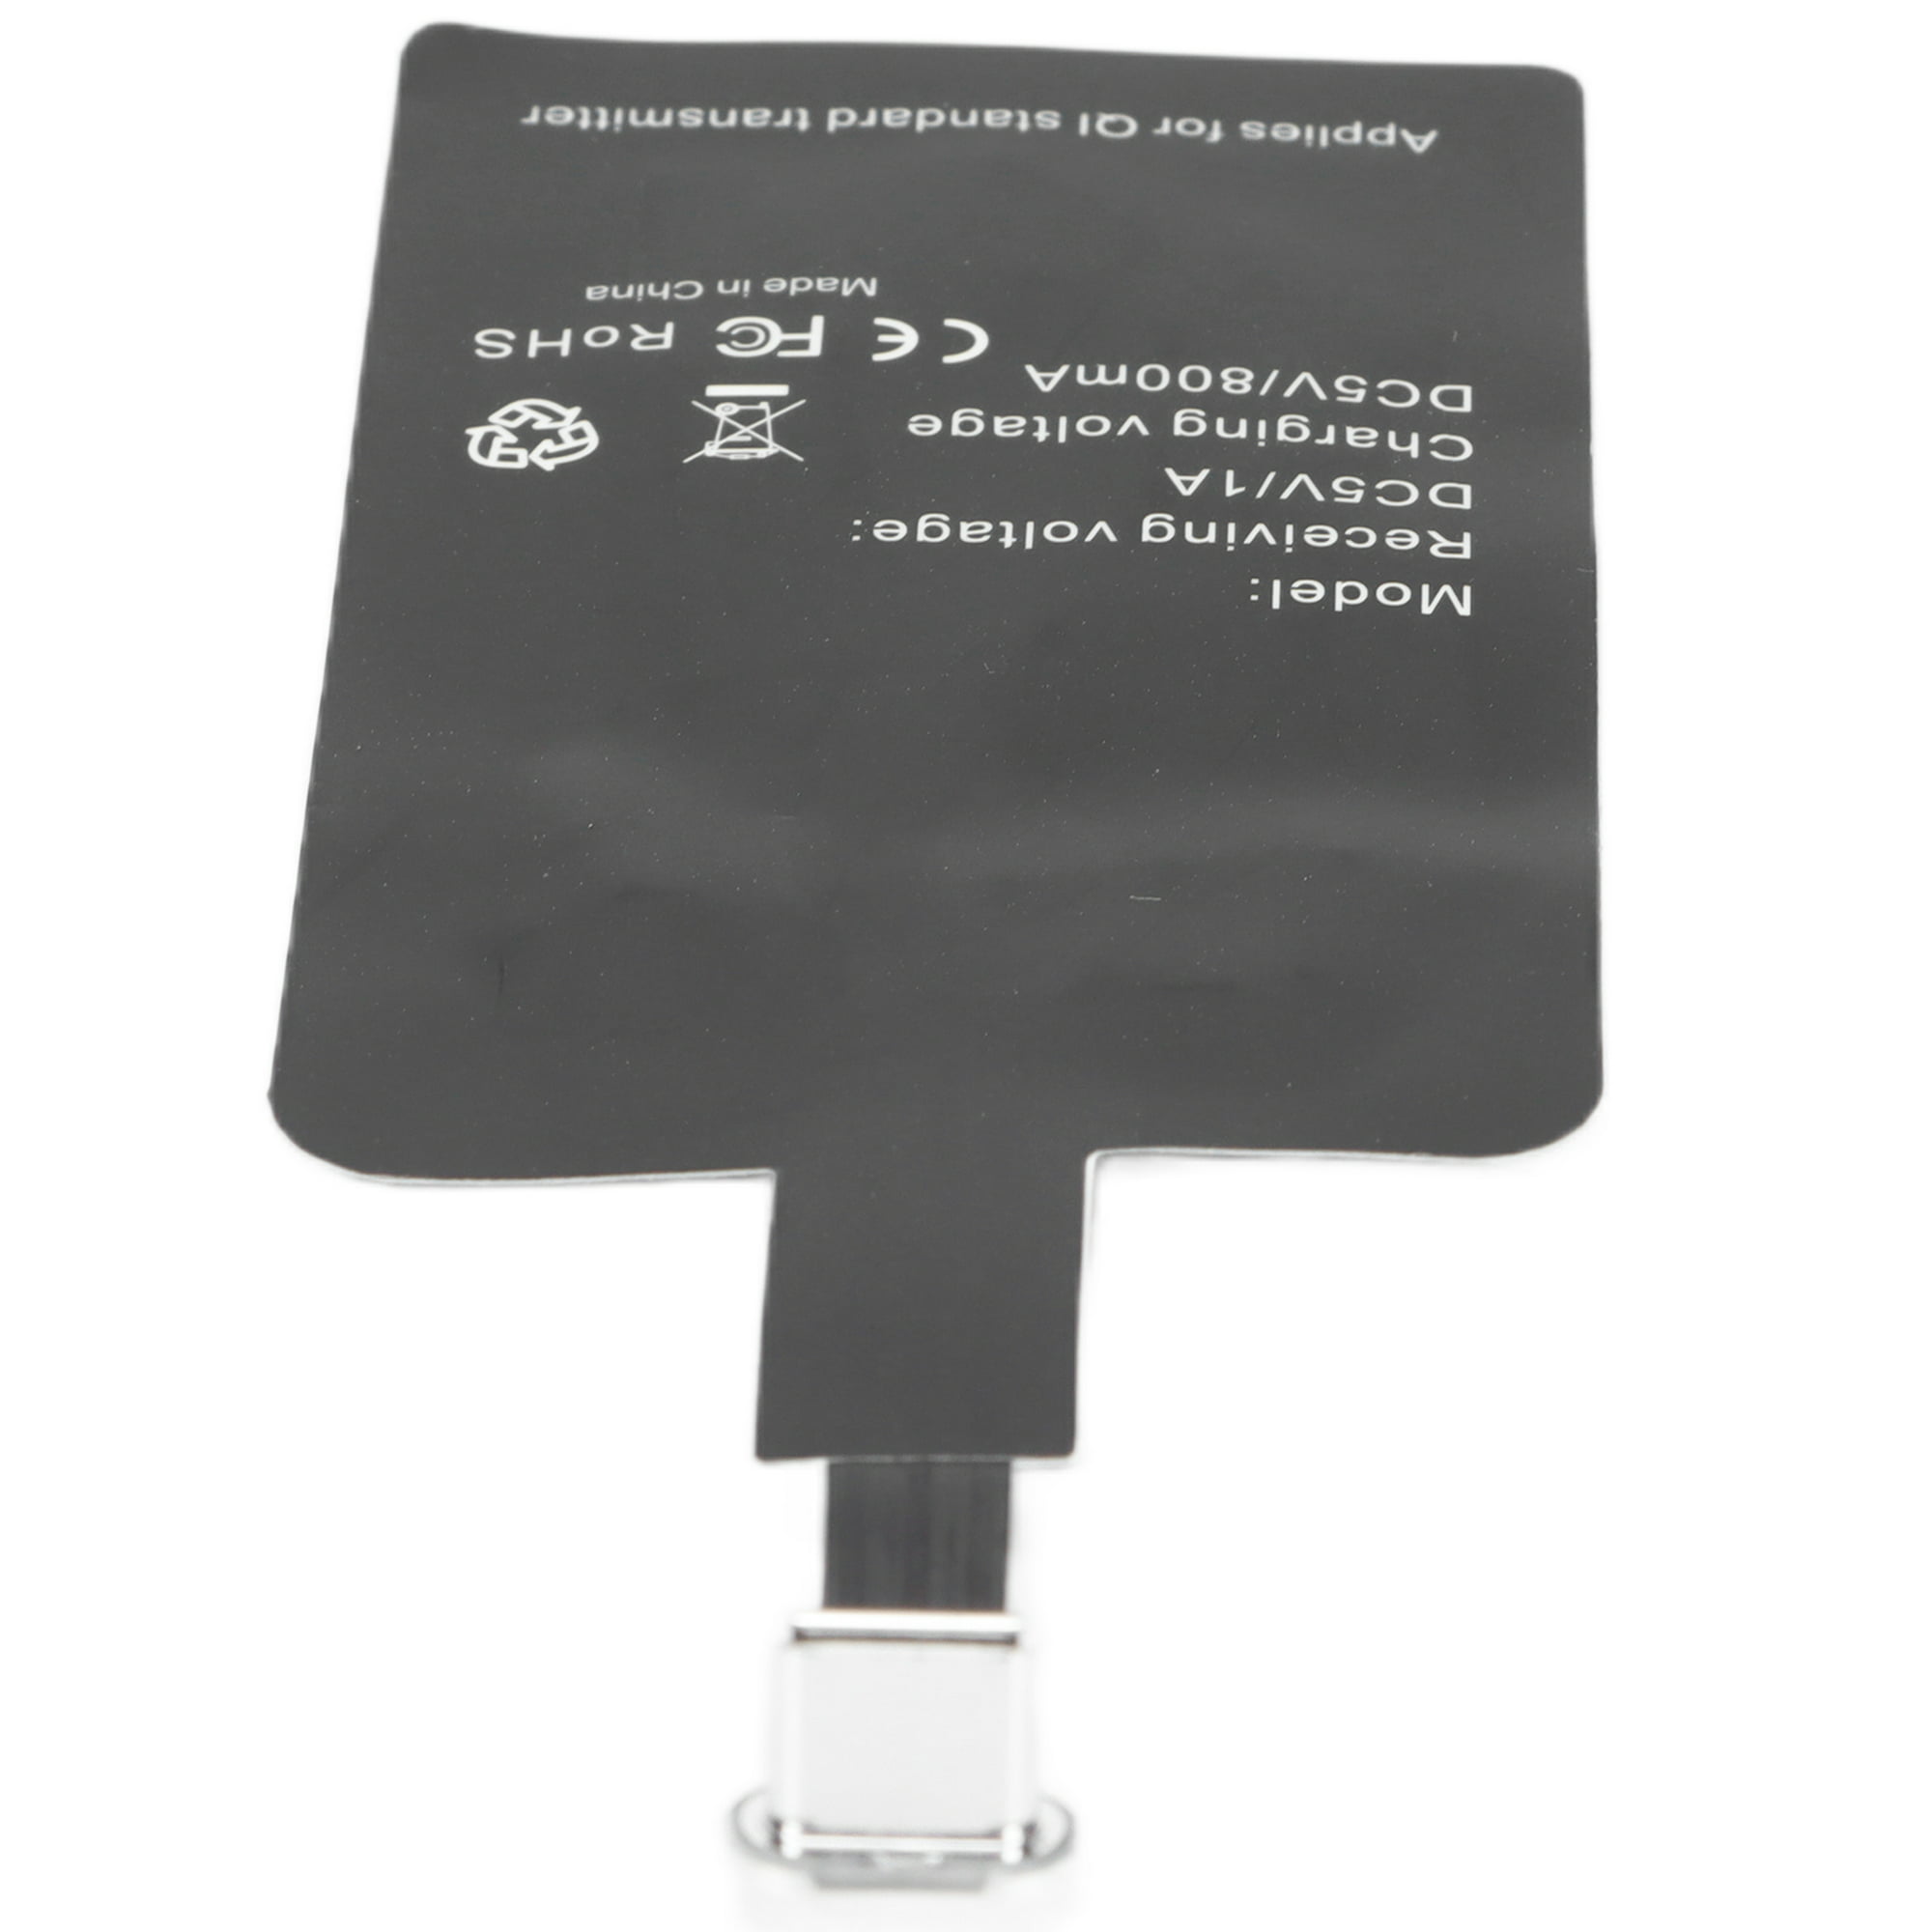 Receptor De Carga Inalámbrica Qi Tipo C, Adaptador De Cargador Inalámbrico  Rápido Micro USB Tipo C Duradero Para Teléfonos Android Crtynell Qi Type C  Wireless Charging Receiver